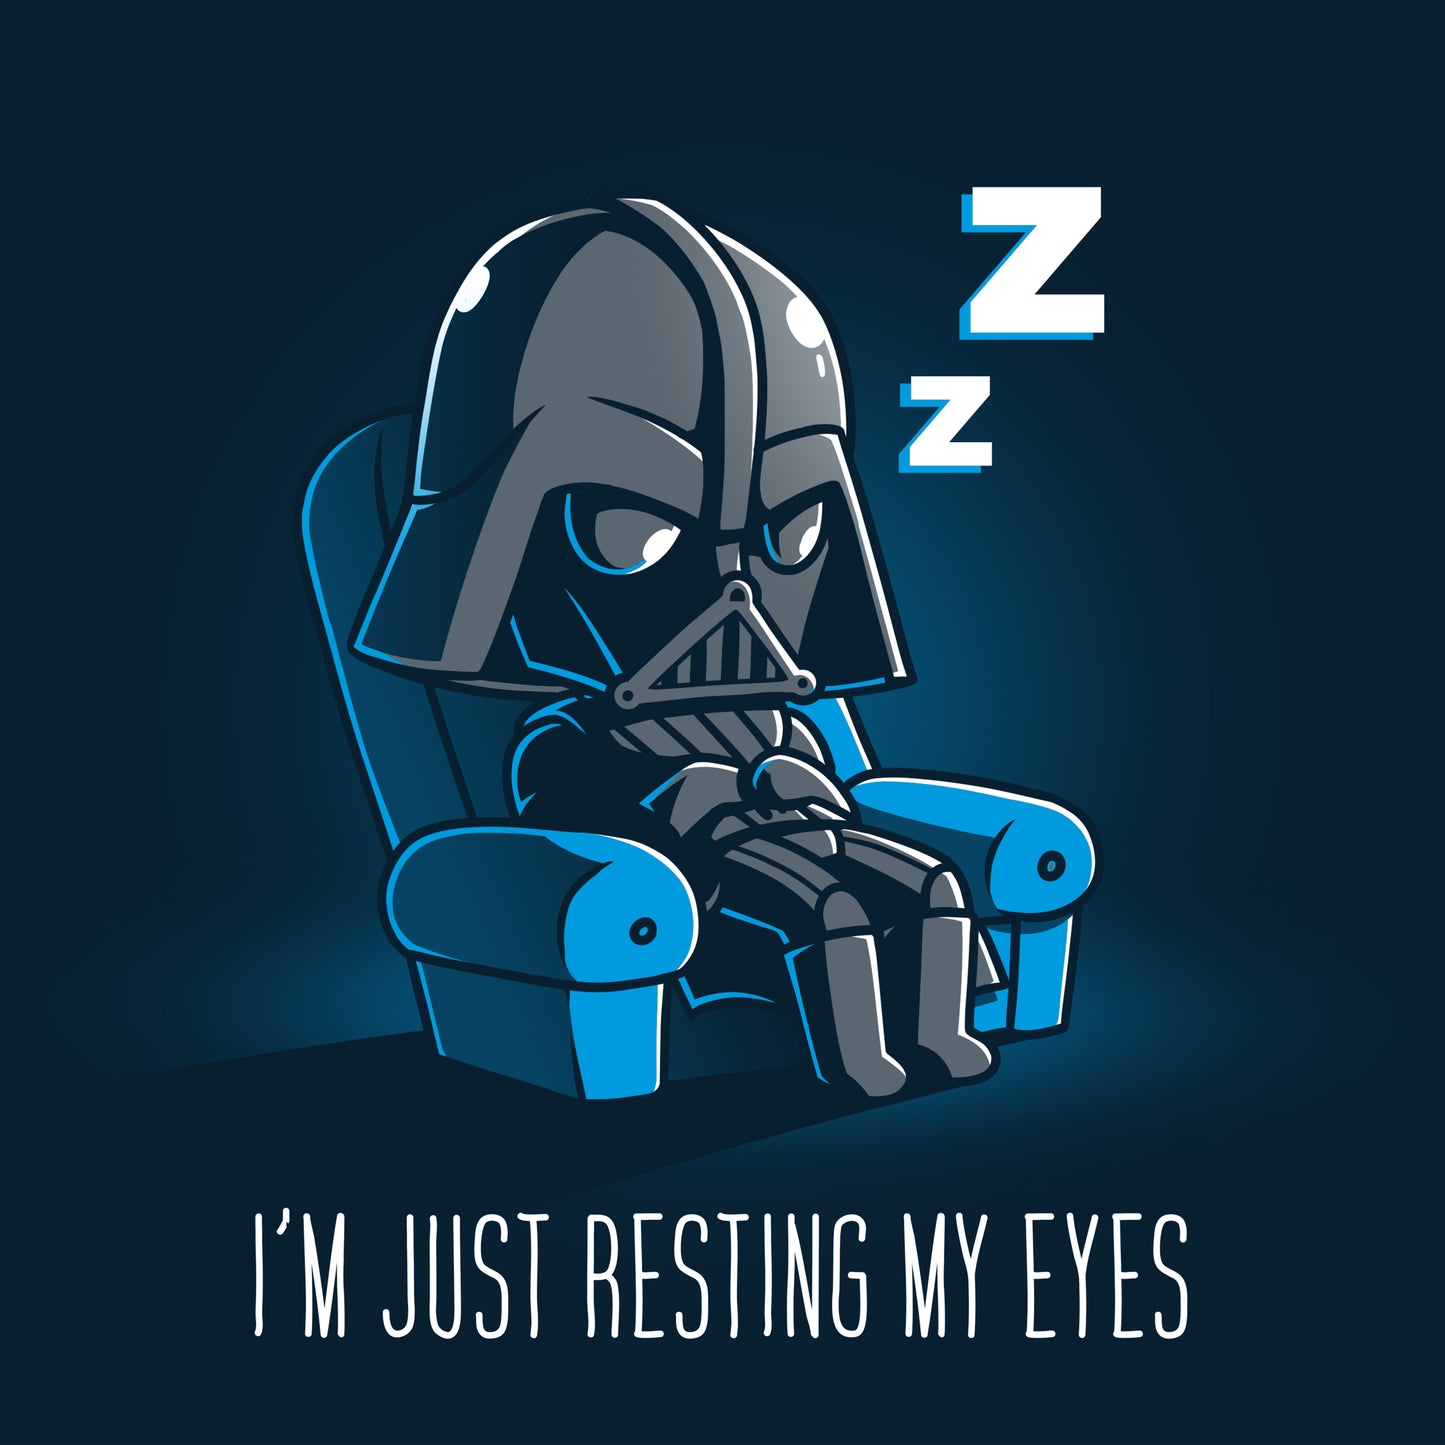 Officially licensed Star Wars Darth Vader T-shirt featuring a super soft design of Darth Vader sleeping in a chair with the words "I'm just resting my eyes.